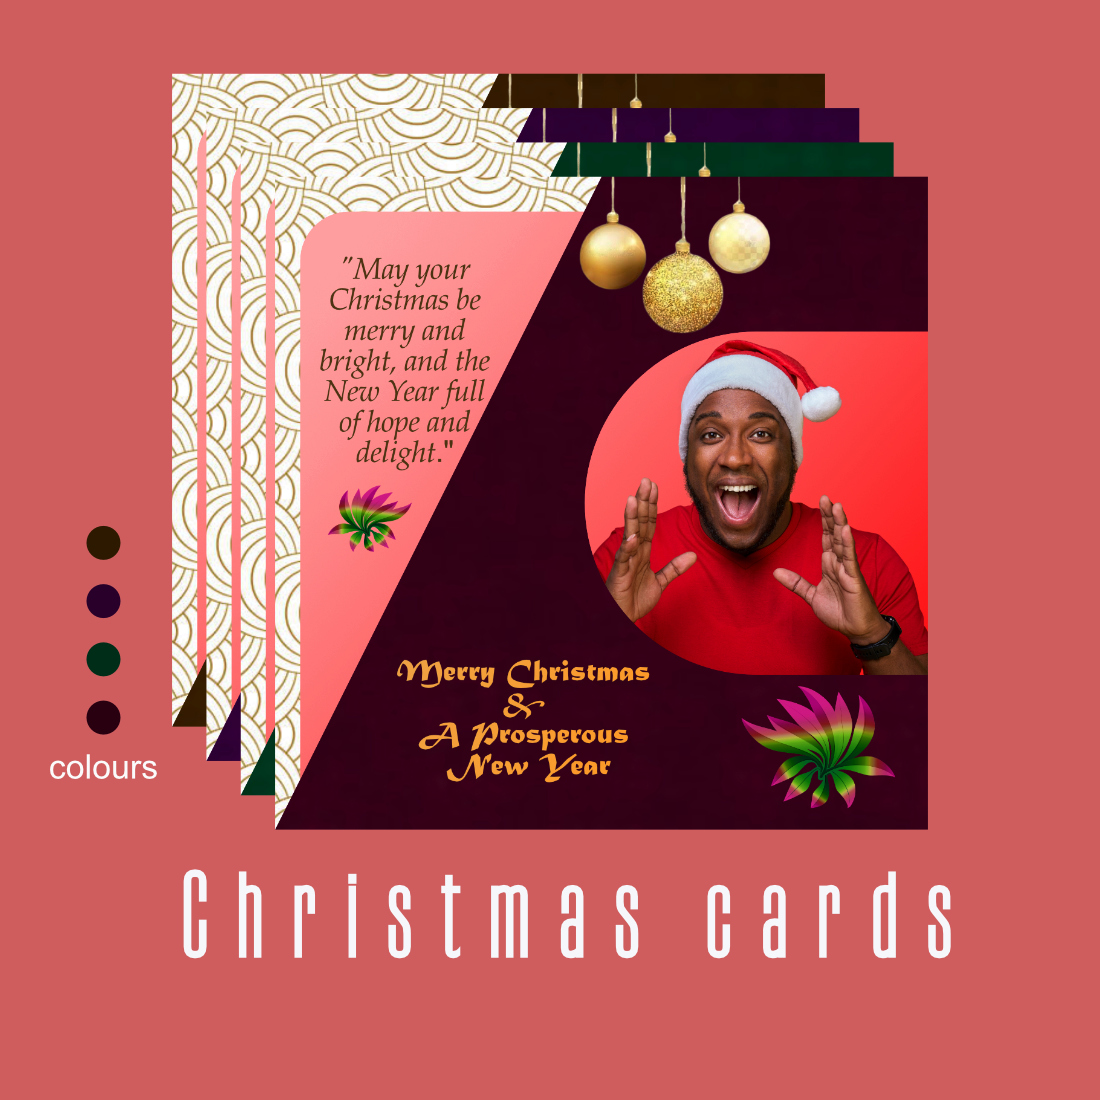 8 Beautifully Designed Christmas Cards with Inspiring Christmas Wishes cover image.